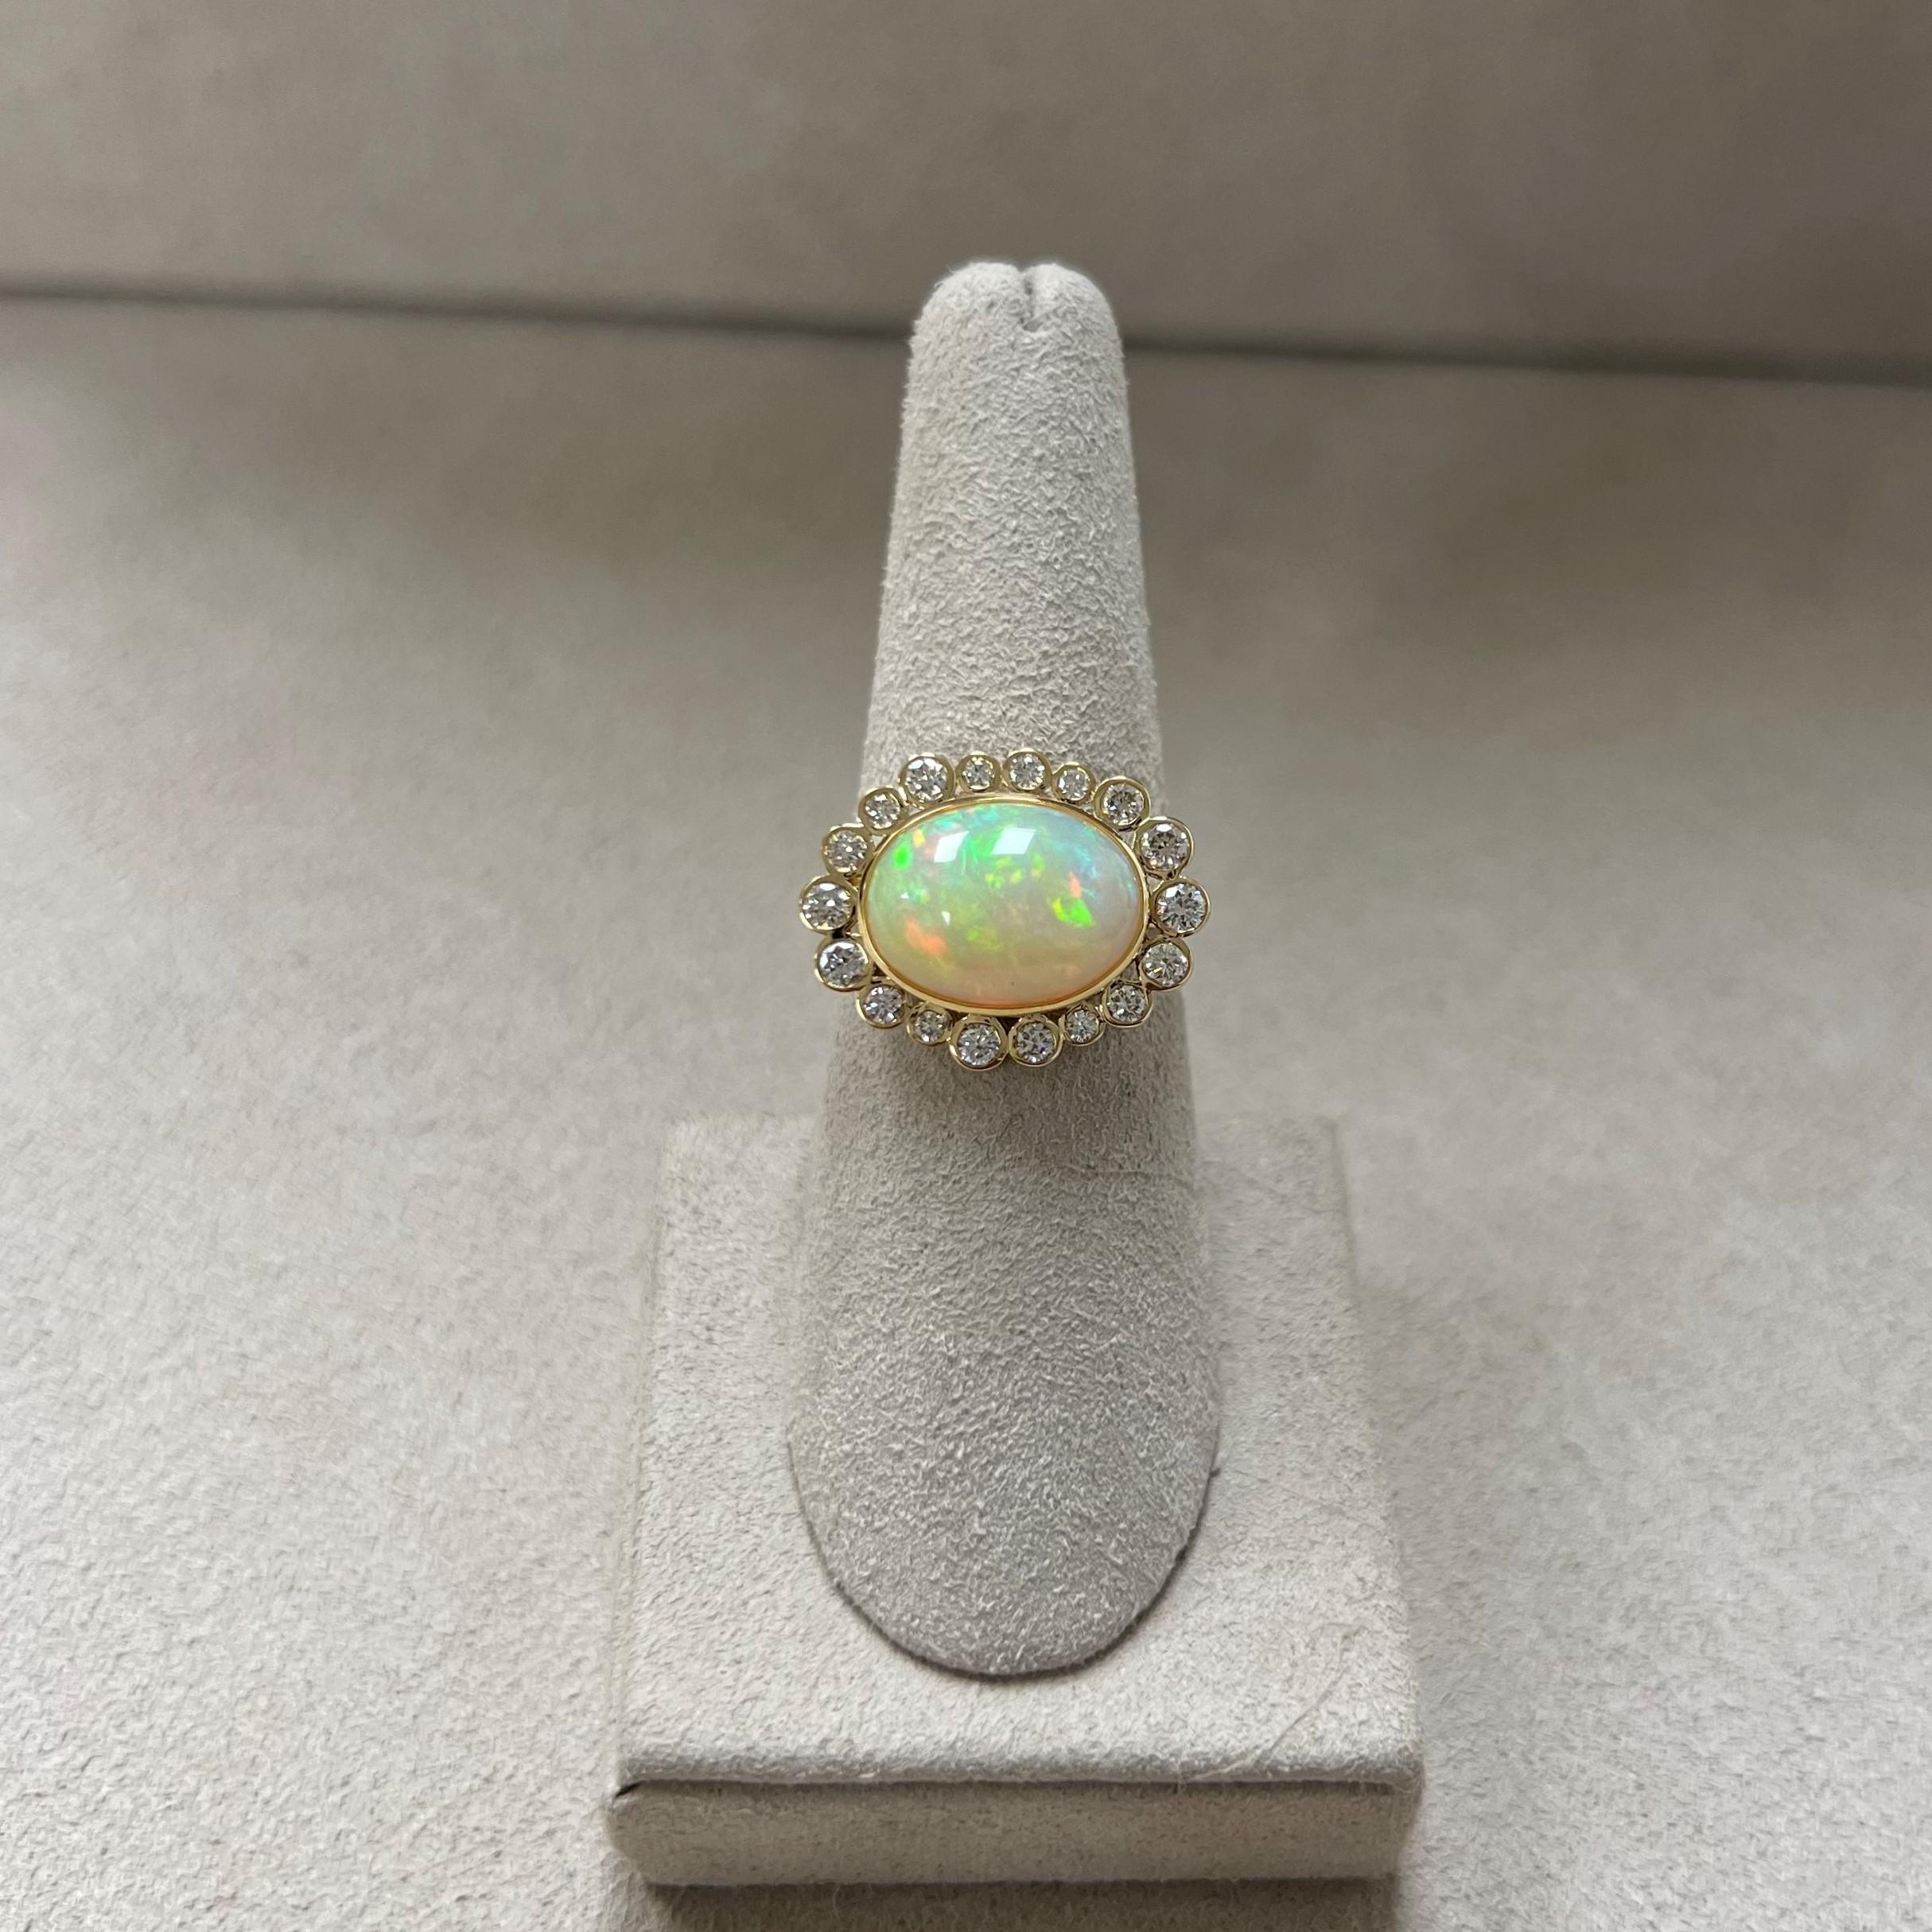 Created in 18 karat yellow gold
Ethiopian Opal 3.70 carats approx.
Diamonds 0.60 carat approx.
Ring size US 6.5, can be sized
Limited edition



About the Designers ~ Dharmesh & Namrata

Drawing inspiration from little things, Dharmesh & Namrata